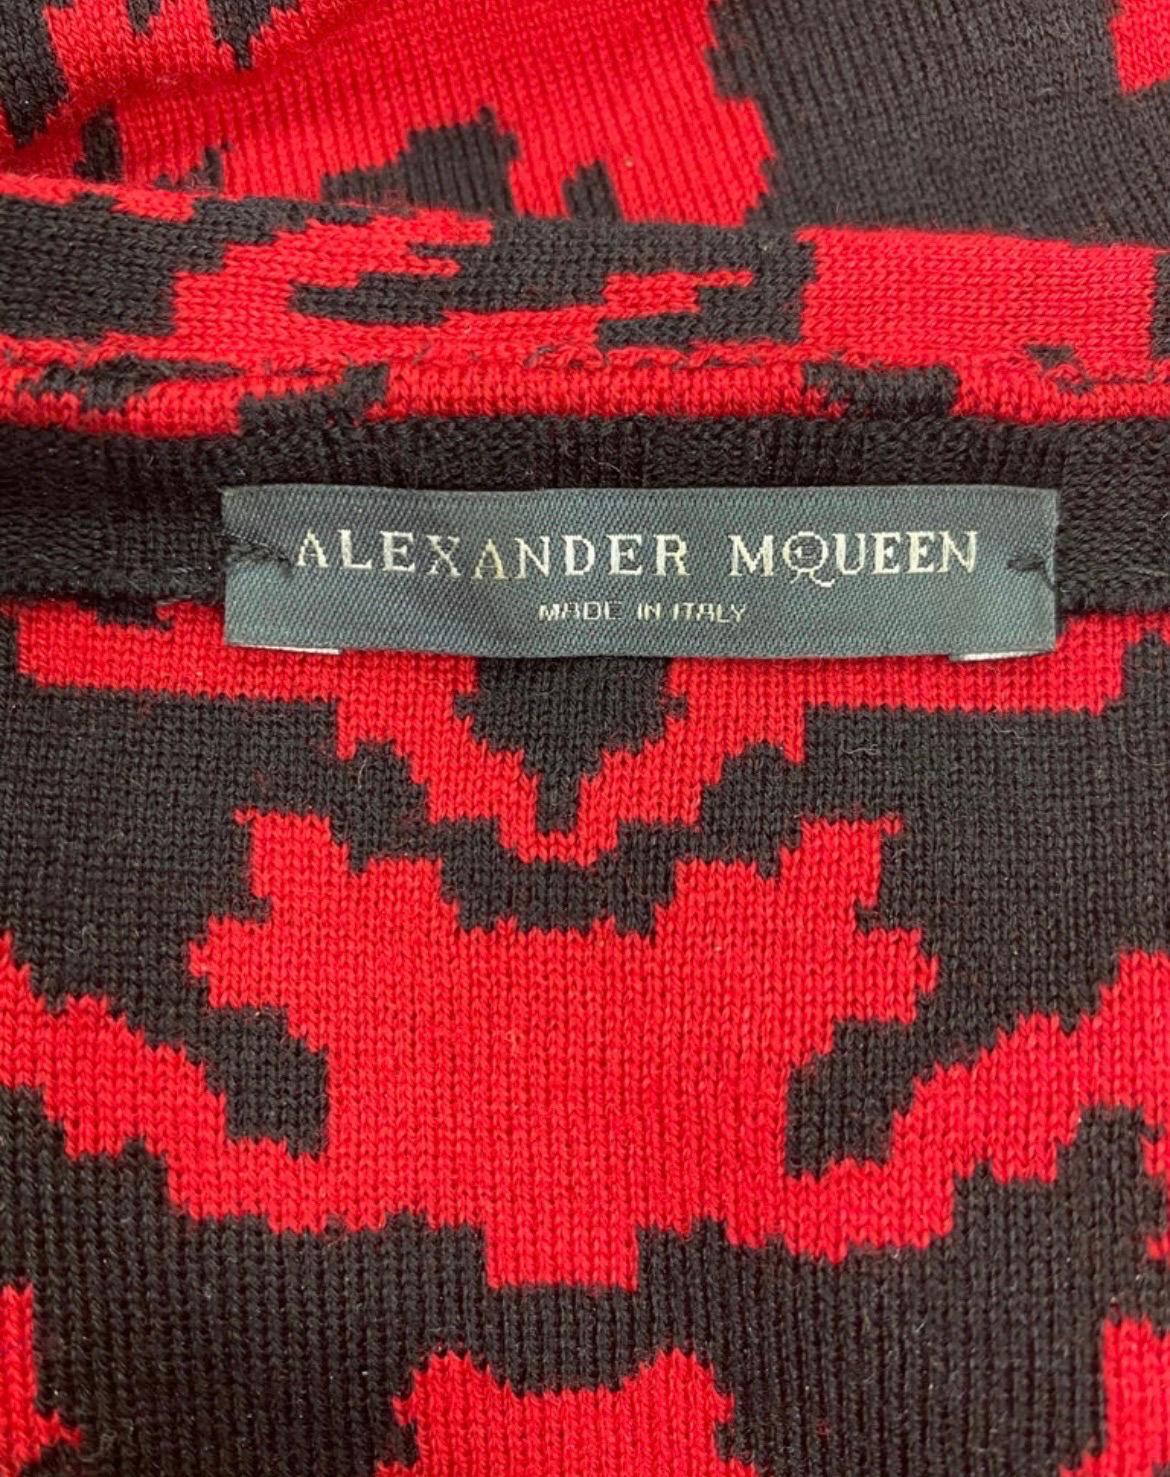 F/W 2009 Iconic Alexander Mcqueen houndstooth print knit dress  For Sale 5